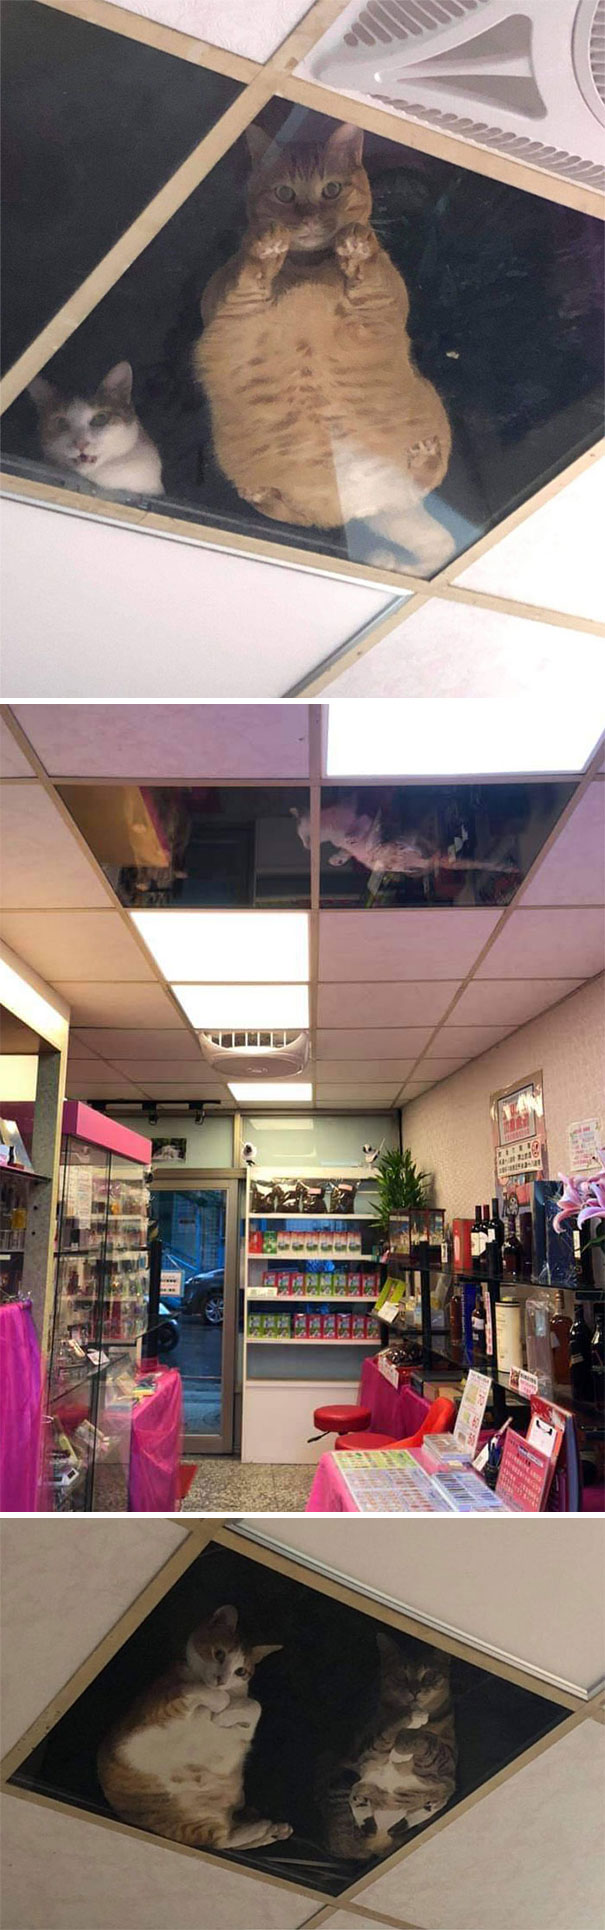 Shop Owner Installs Glass Ceiling For Cats So They Could Stare At Him While He Works